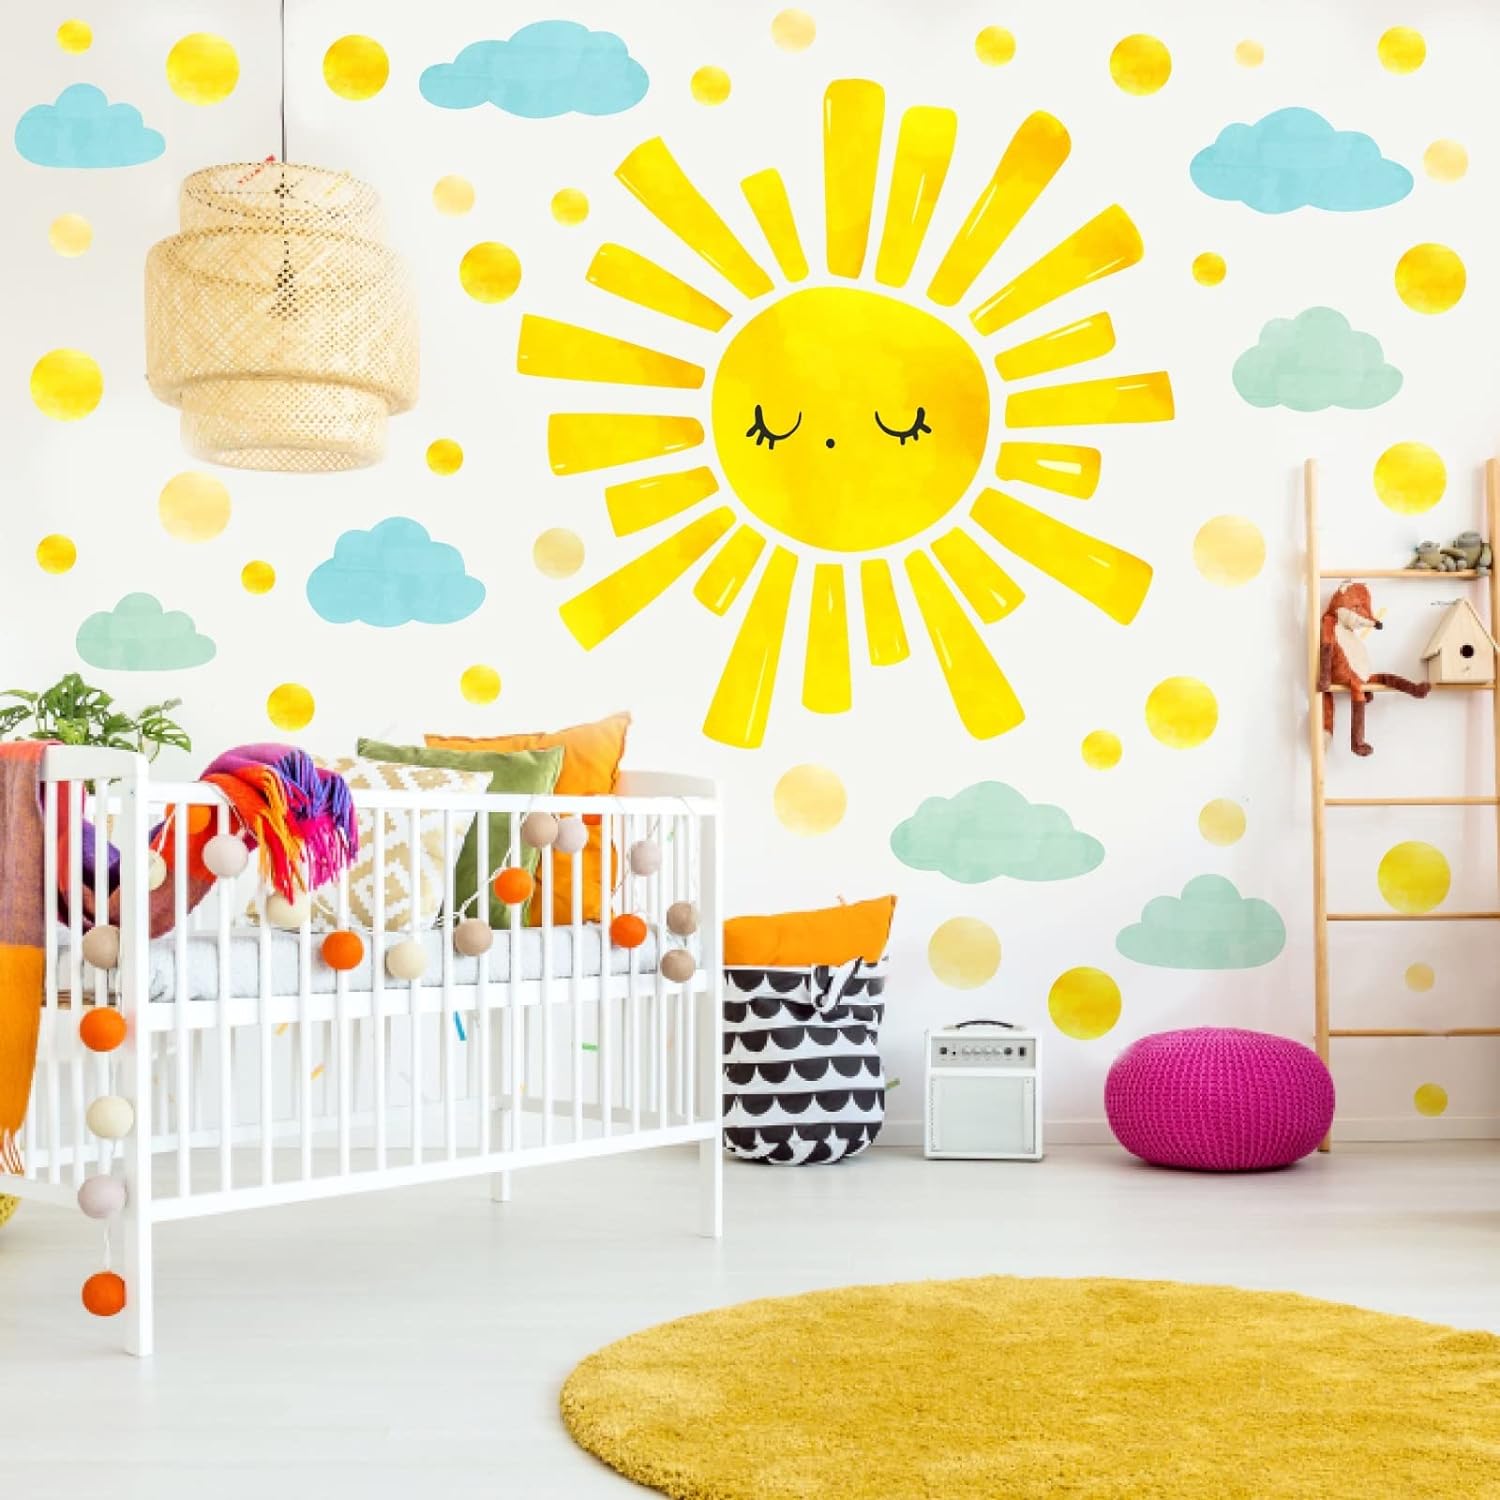 Large Sun Clouds Wall Decals Polka Dots Wall Decals Sun Cloud Wall Stickers for Kids Room Bedroom Nursery Playroom Classroom Decor